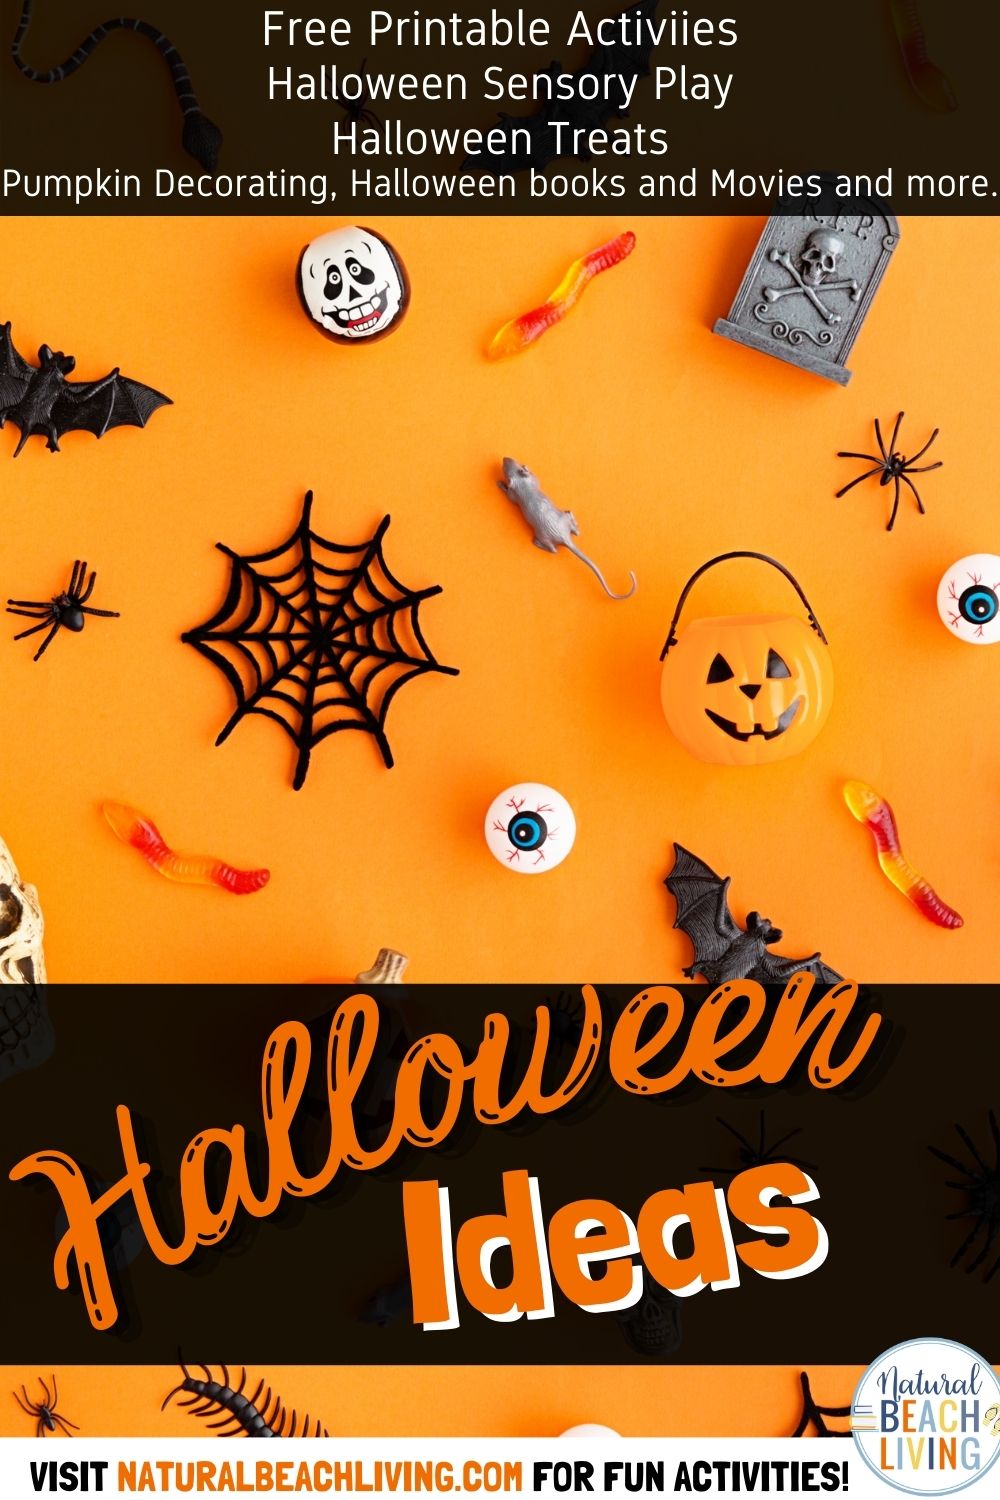 100+ Things to do on Halloween – Fun Activities for the Whole Family